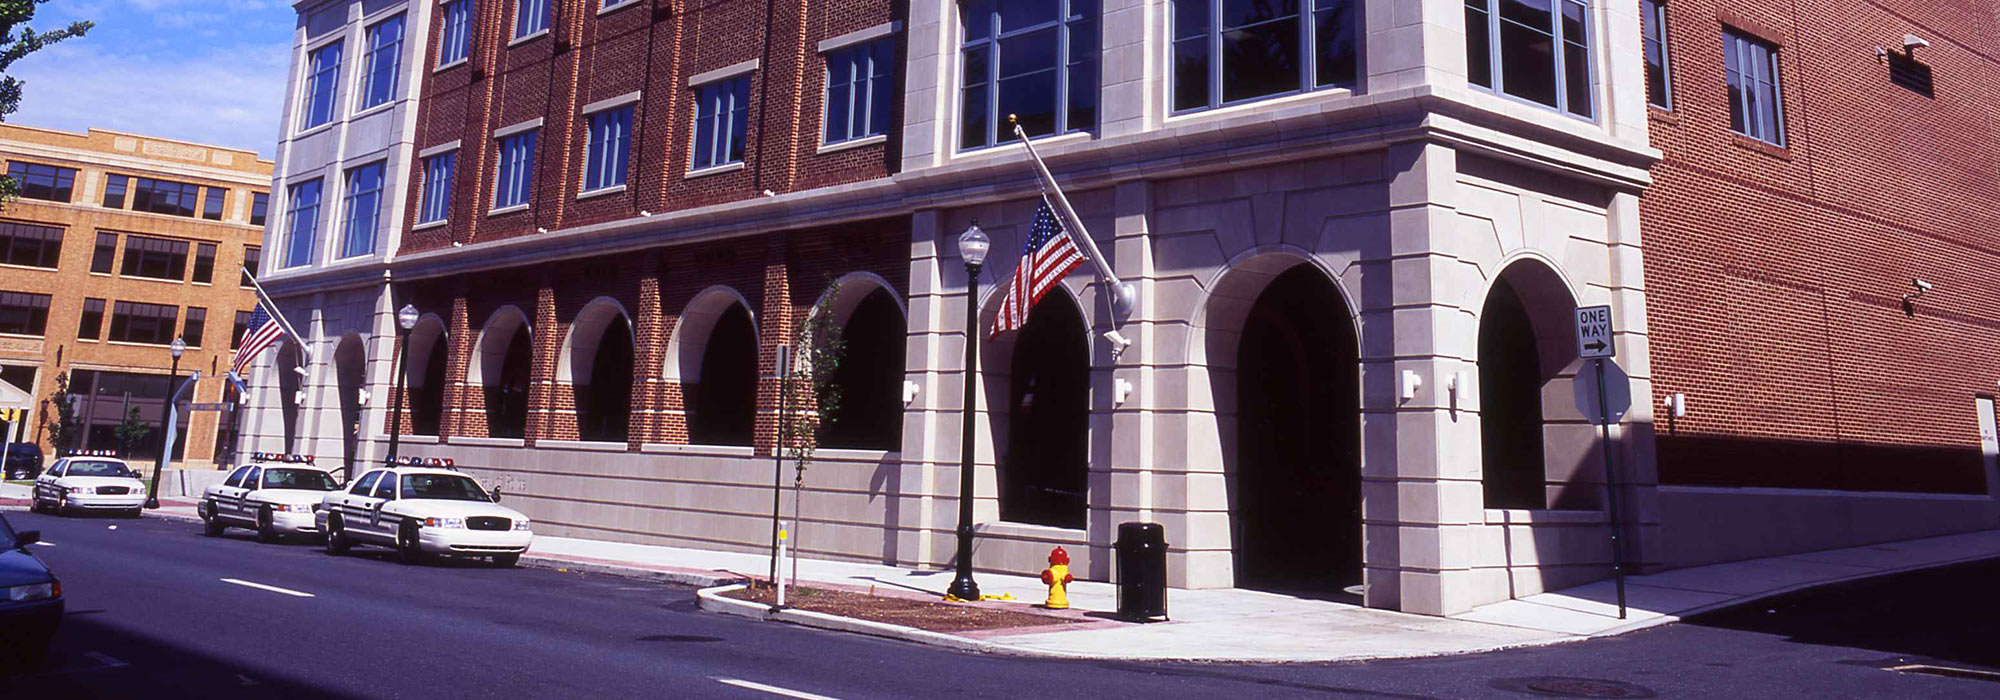 Image of City of Lancaster Police Department